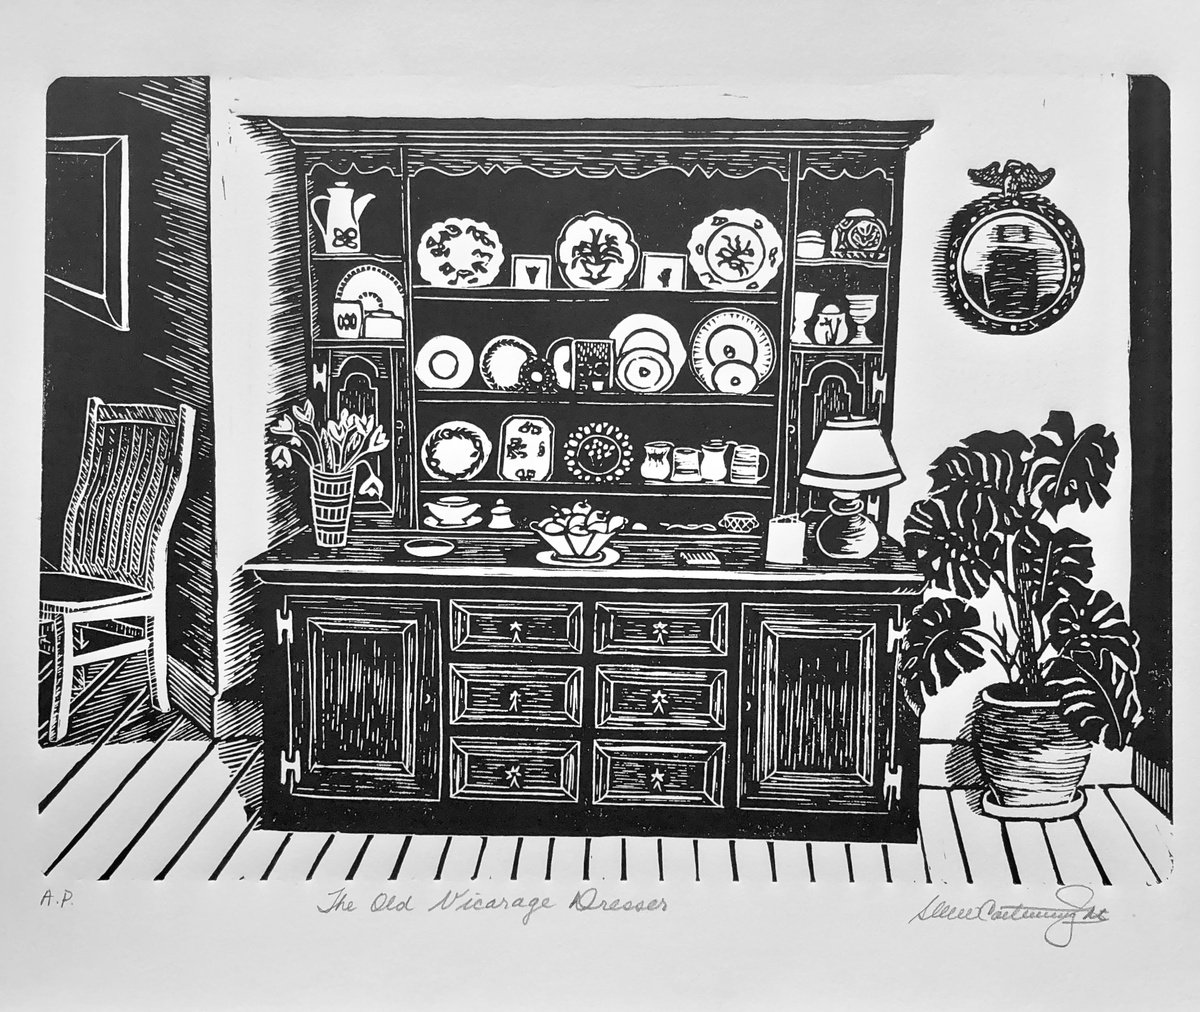 The Old Vicarage Dresser by Susan Cartwright